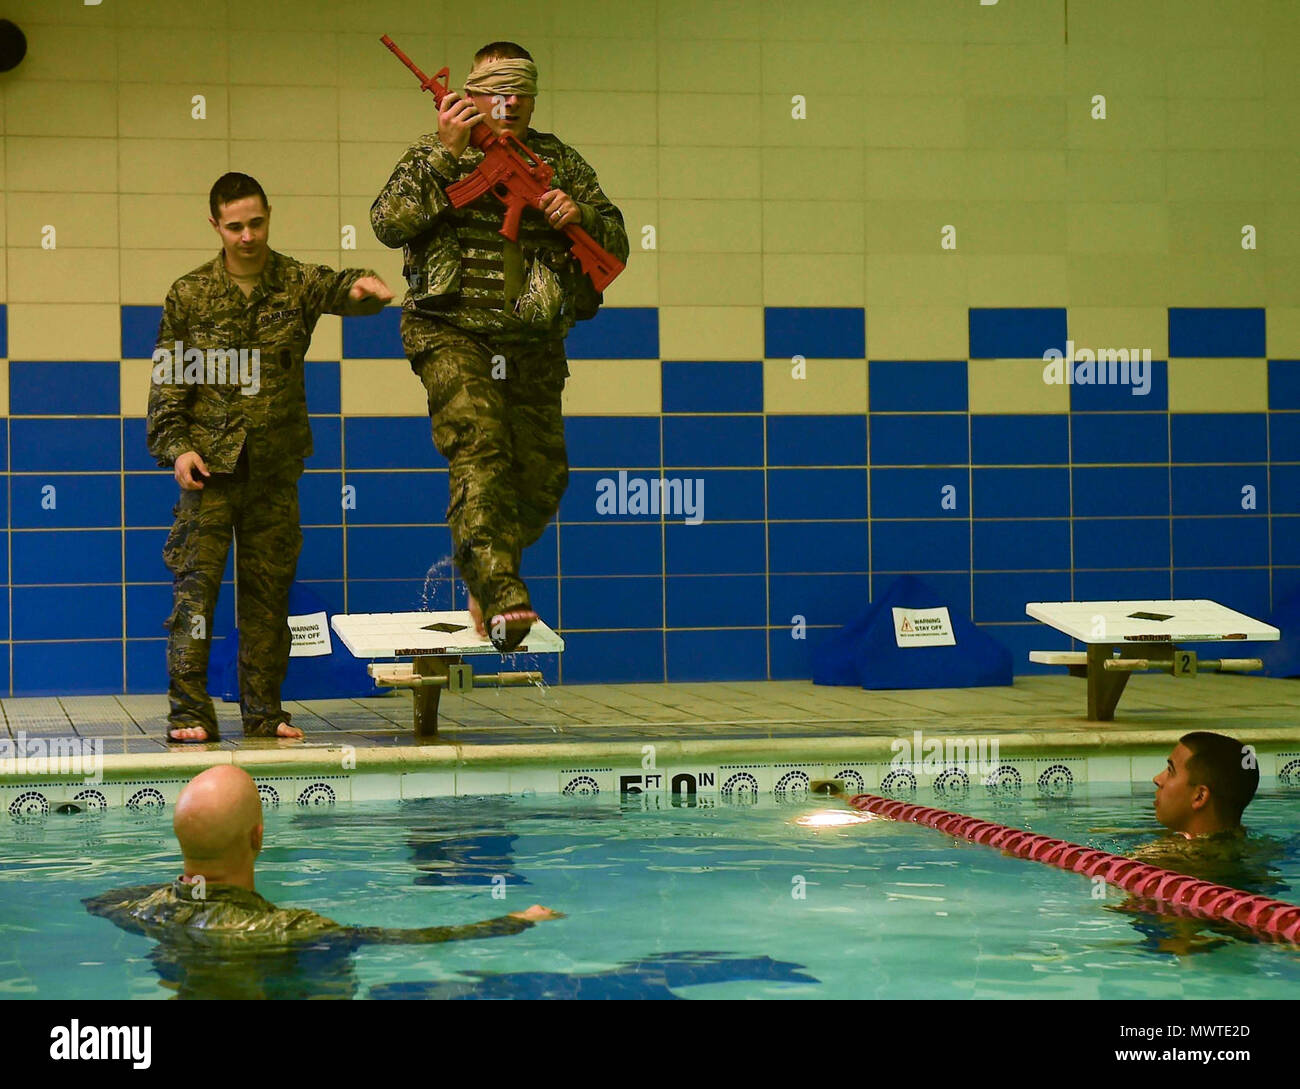 U.S. Air Force Tech. Sgt. Daniel Day, 633rd Security Forces flight chief, conducts water confidence training during a training evaluation at Joint Base Langley-Eustis, Va., April 28, 2017. To accomplish this training evolution, Day had to strip-off his combat vest and recover his weapon after jumping into the Shellbank Fitness Center pool blindfolded. Stock Photo